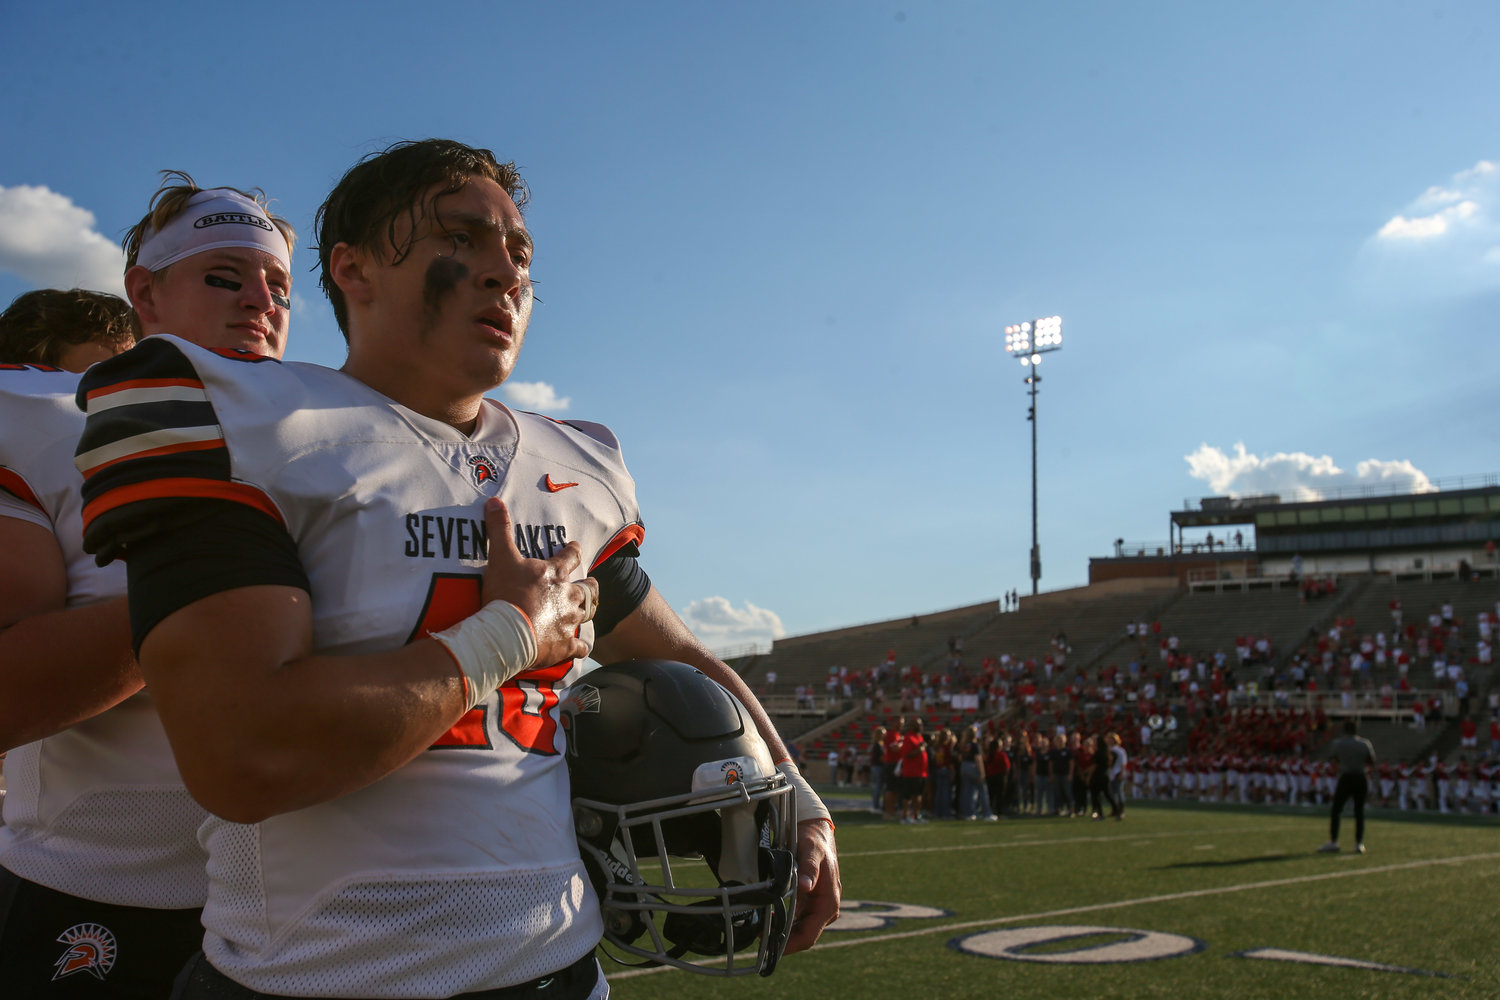 Seven Lakes Spartans linebacker Shane Rasefske (48) stands during the National anthem before the start of the game between the Seven Lakes Spartans and Memorial Mustangs on August 25, 2022 in Houston, Texas. Photo Credit: John Glaser - Katy Times